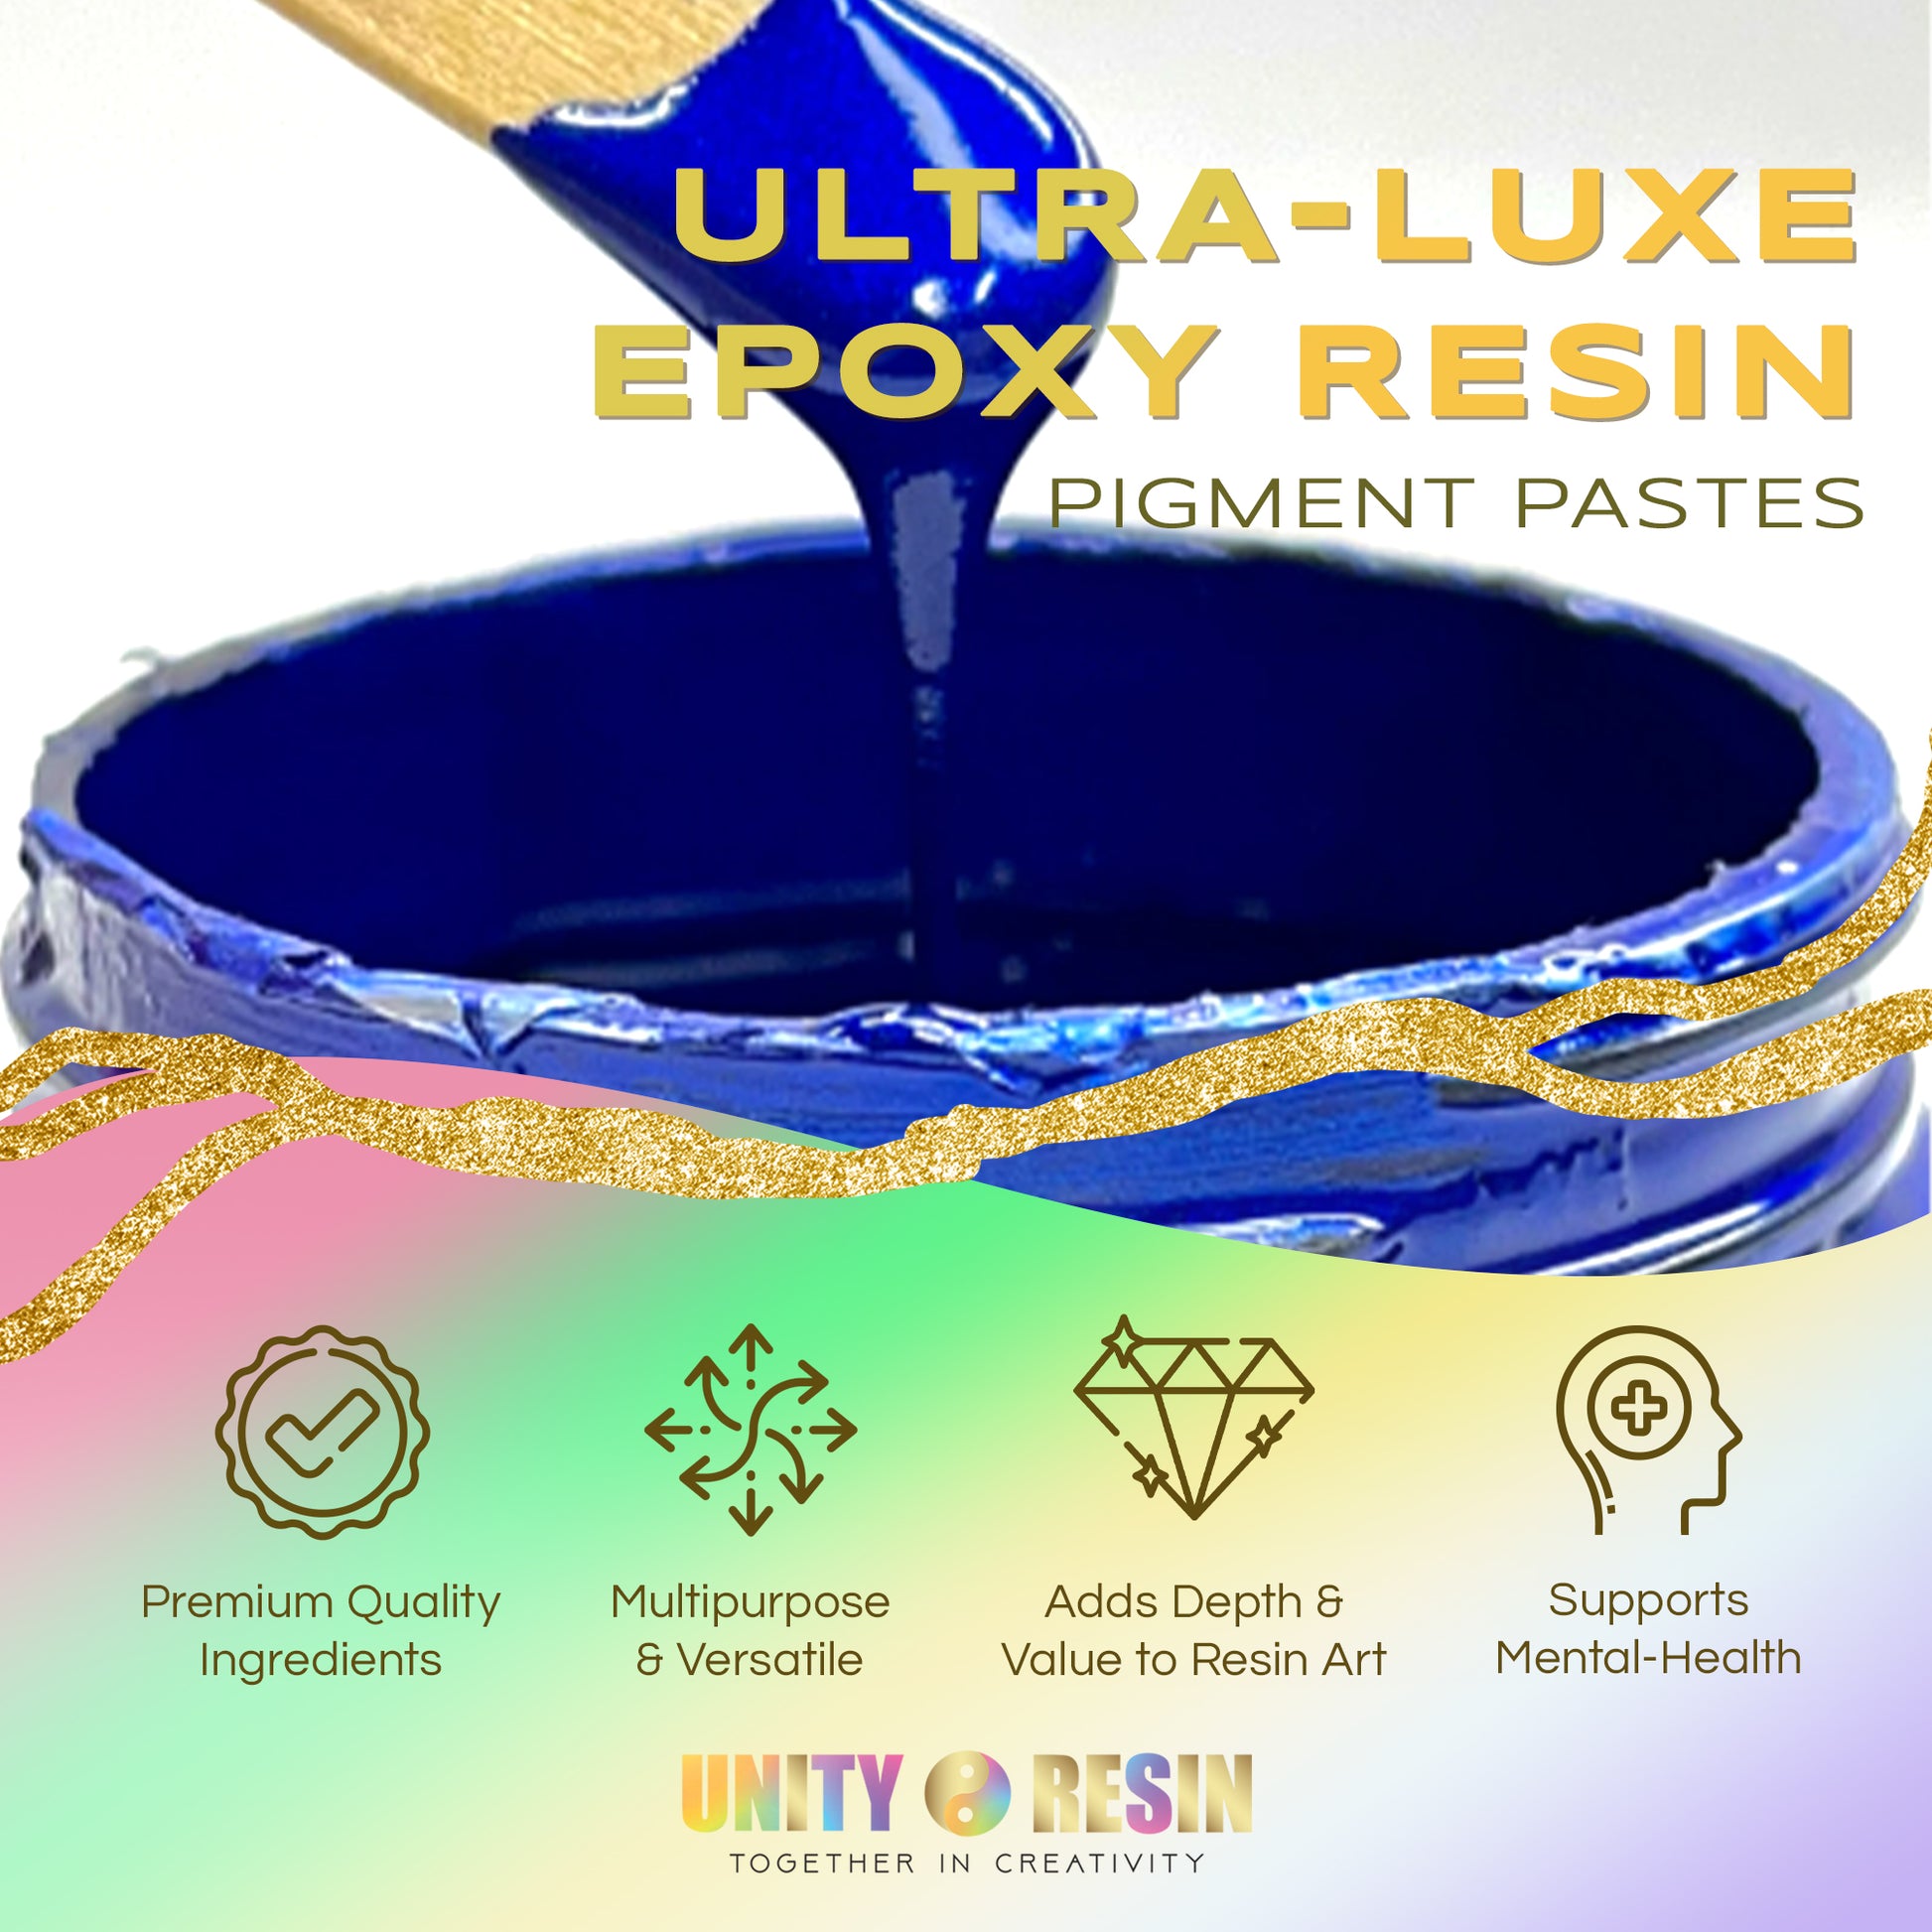 Ultra-Luxe Epoxy Resin Pigment Paste-NIGHT TIDES (50G)